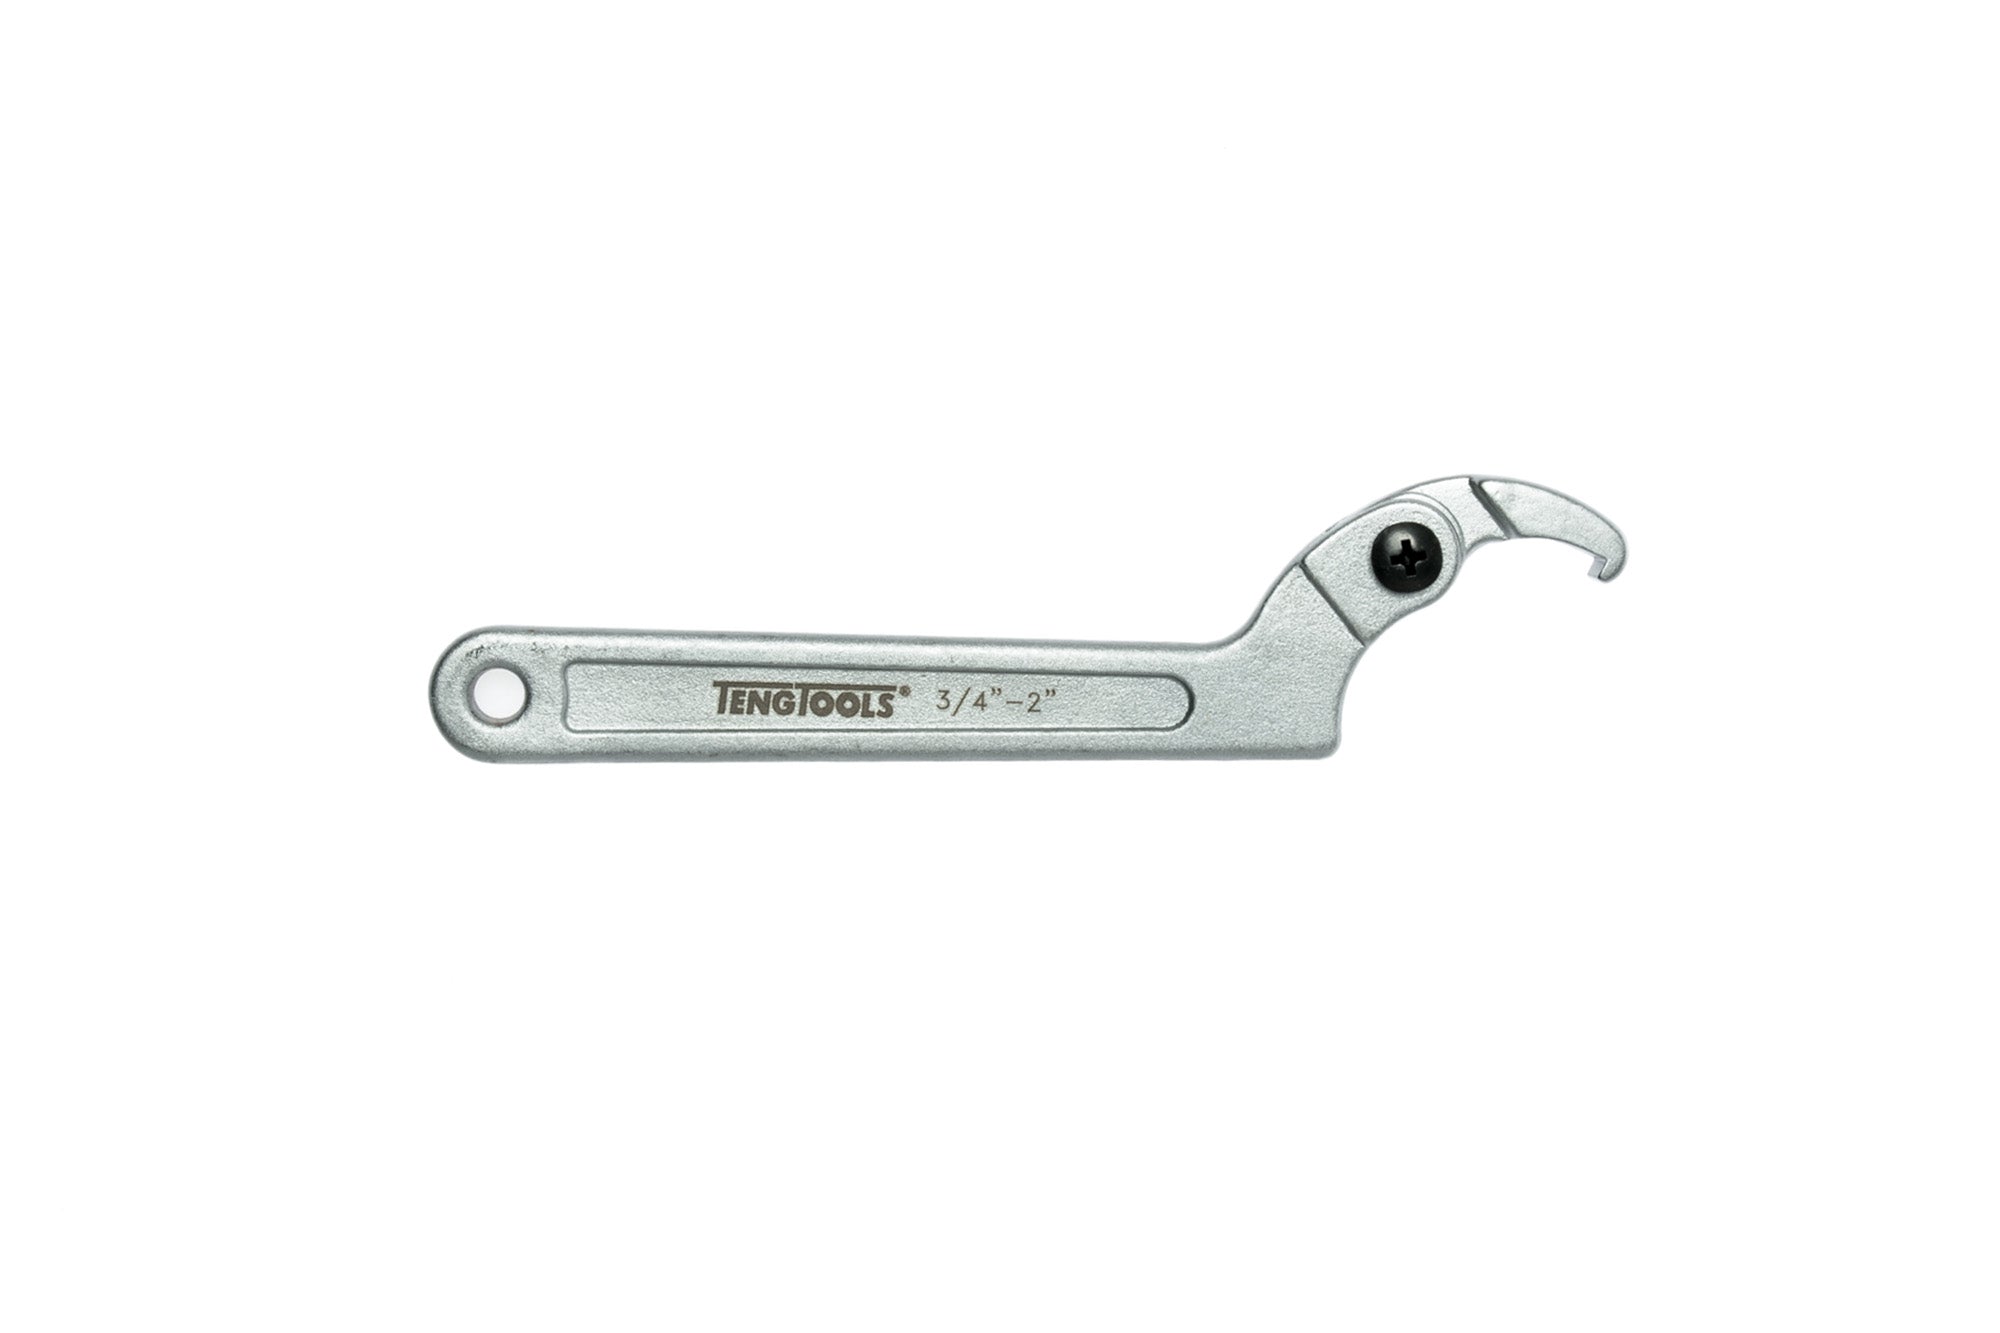 Adjustable Spanner Wrenches , Coilover Wrench , C-Shape Shock Spanner, Hook Wrench Spanner, - 3/4-2